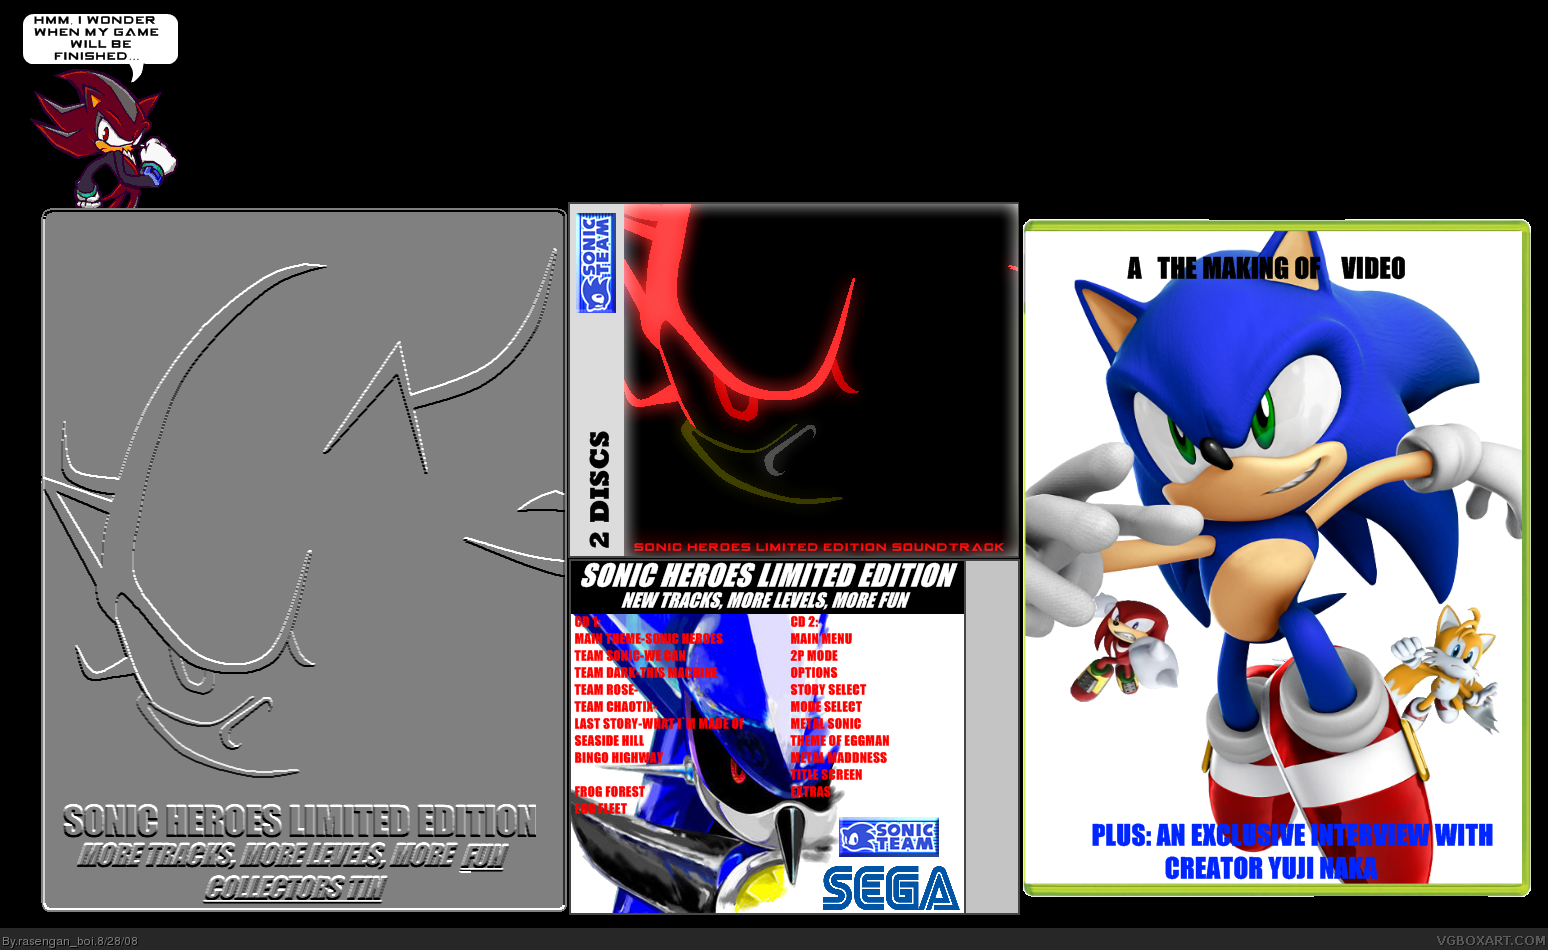 Sonic Heroes Limited Edition box cover